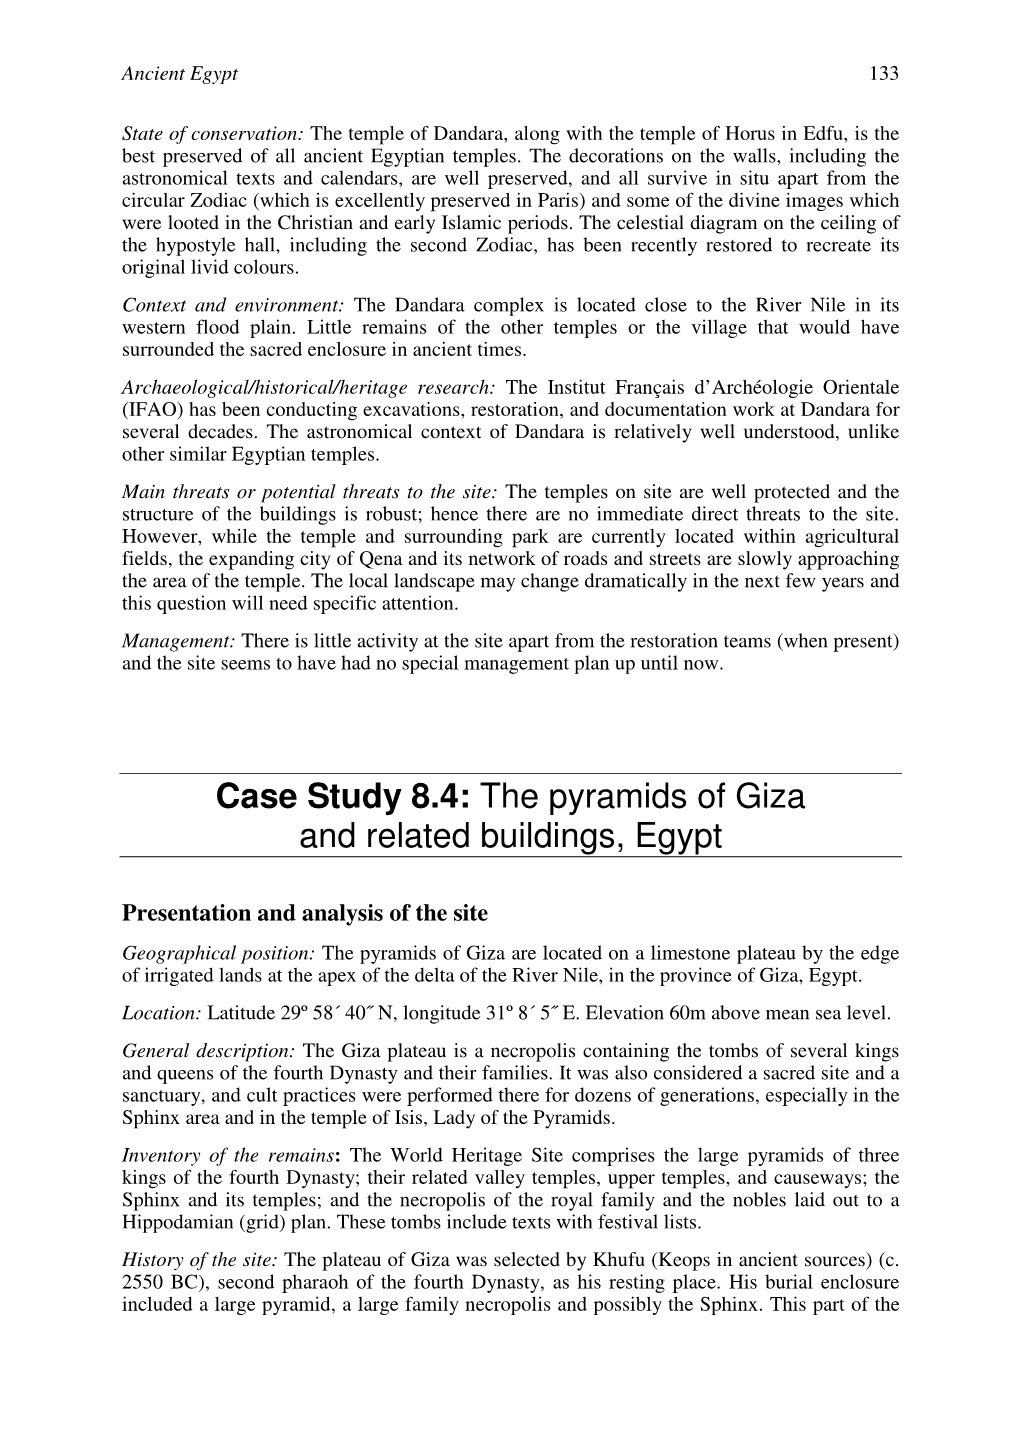 Case Study 8.4: the Pyramids of Giza and Related Buildings, Egypt